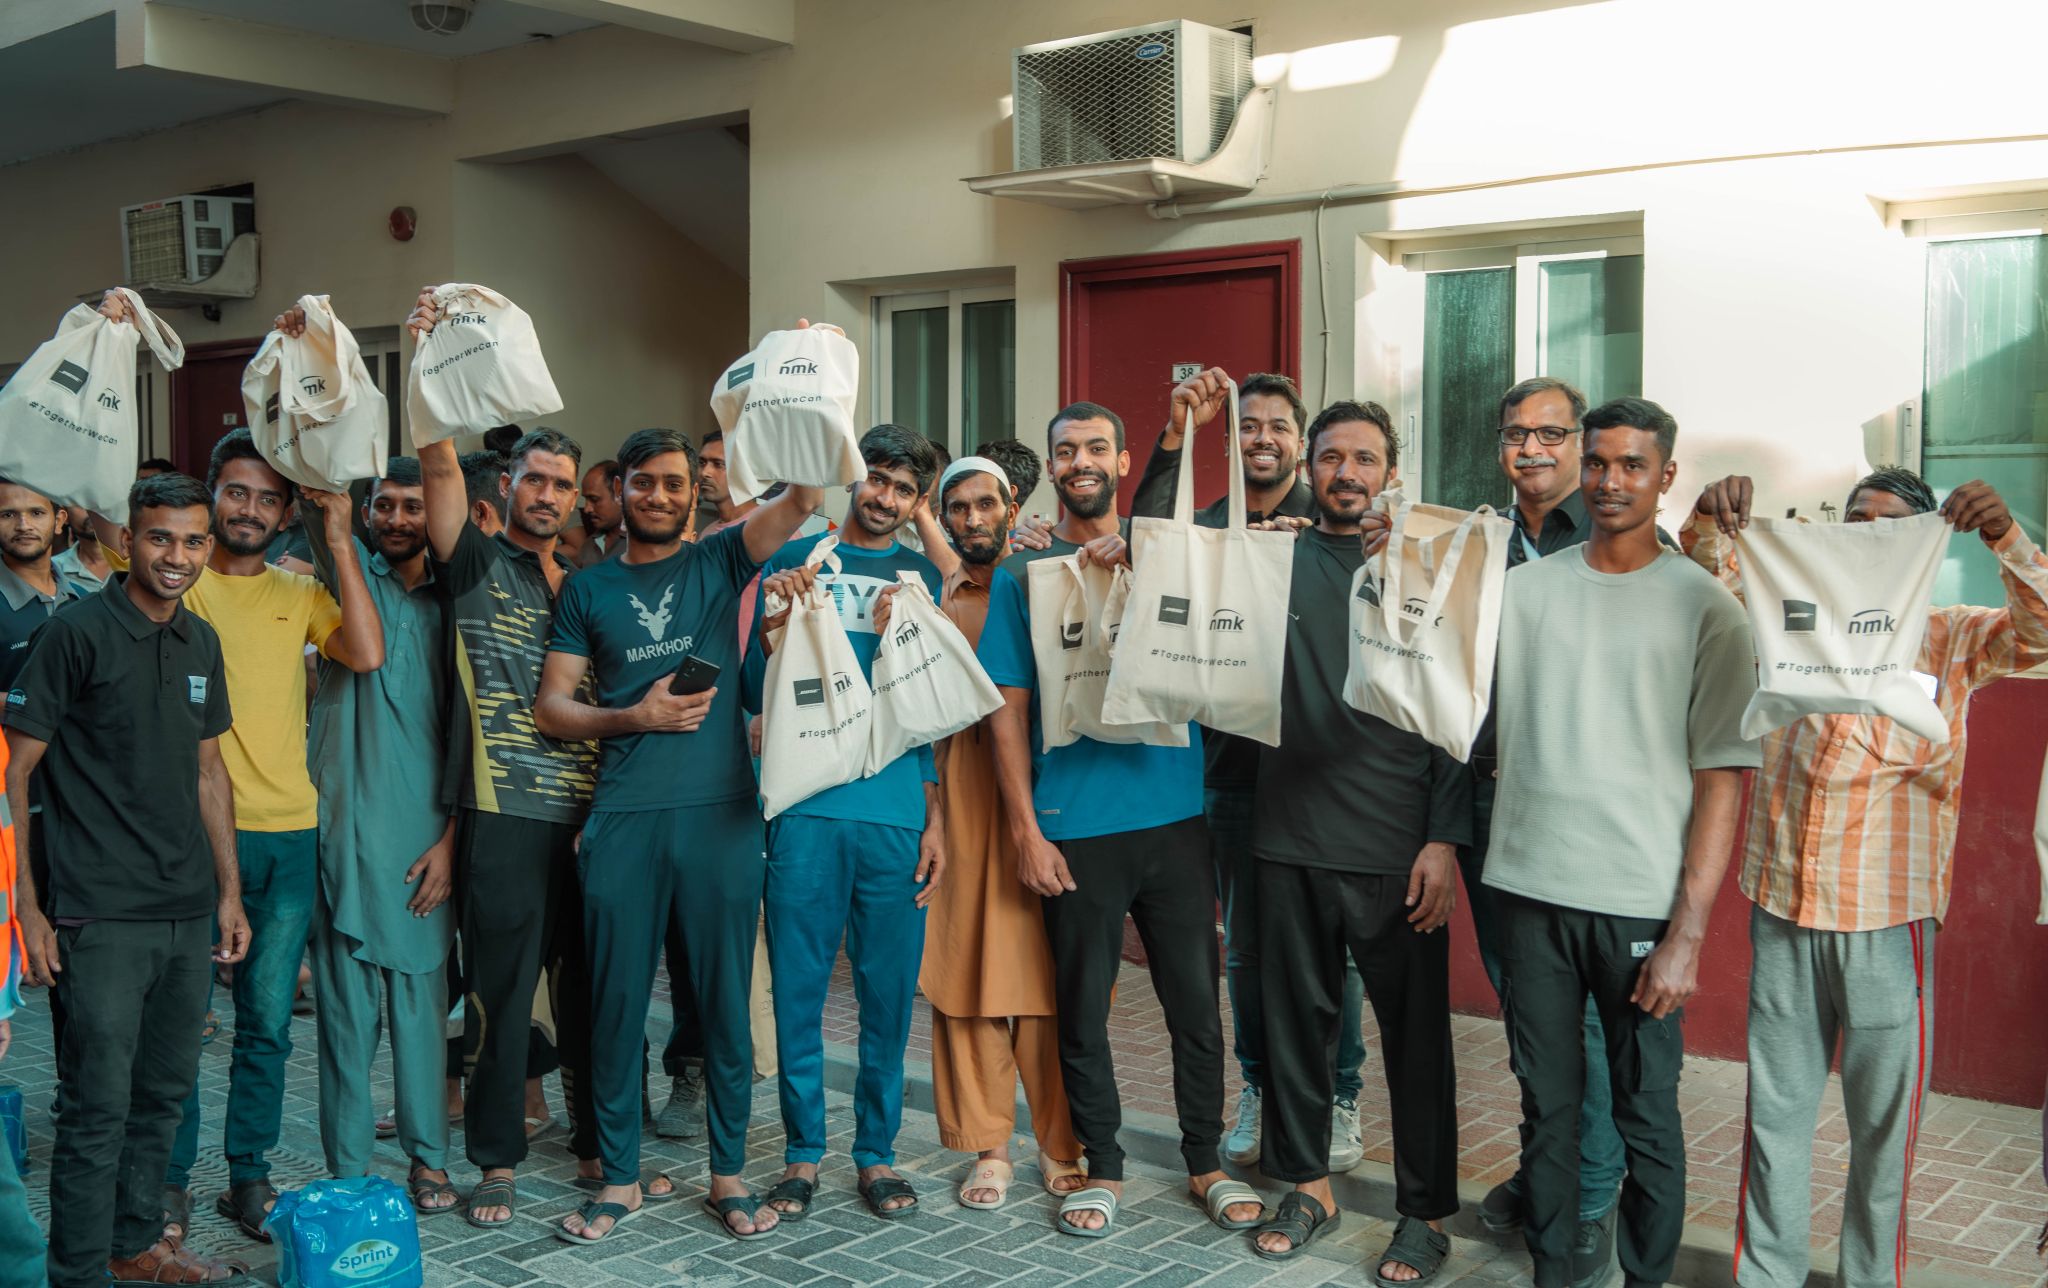 NMK Electronics Extends Compassion and Support Through Ramadan Meal Distribution Initiative